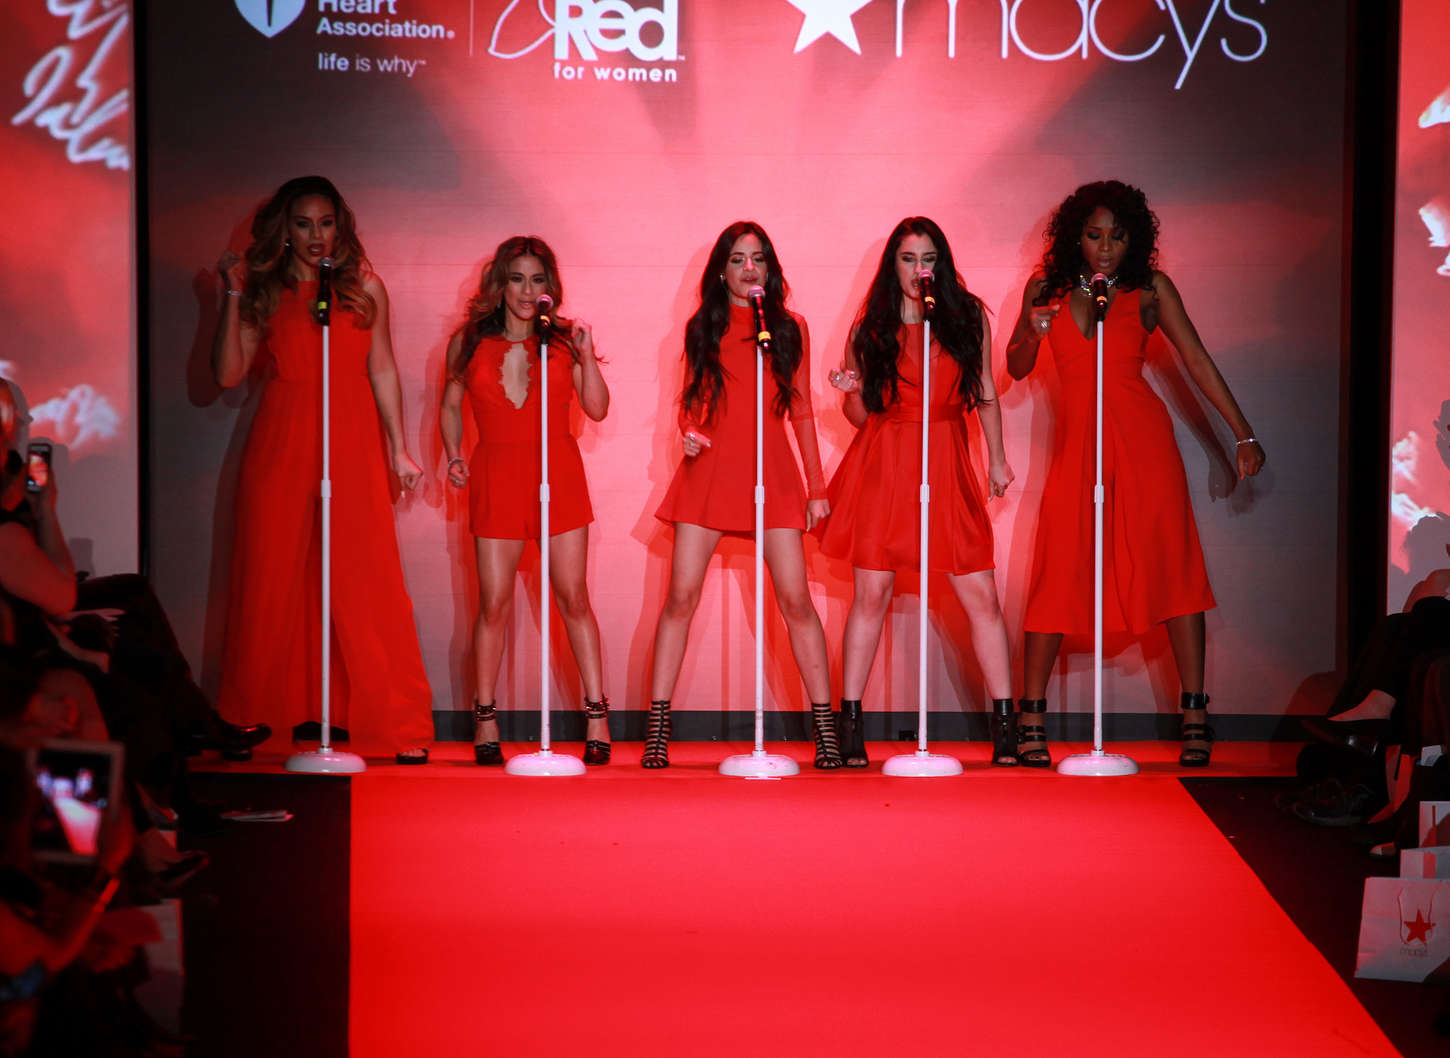 Fifth Harmony Go Red For Women Red Dress Collection in New York